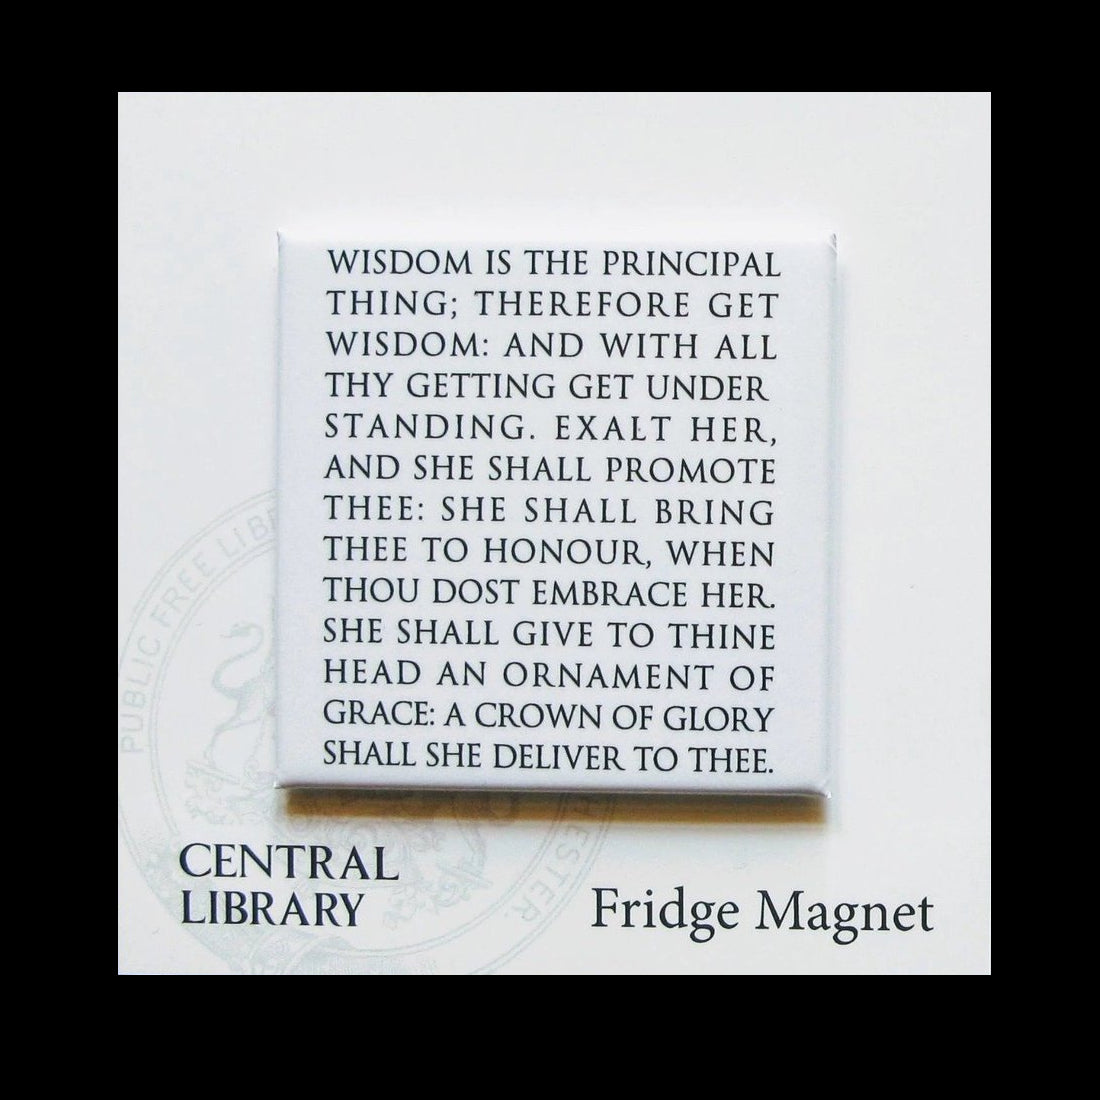 Wisdom is the Principle Thing fridge magnet. This Proverb is engraved around the dome of Manchester Central Library's main Reading Room